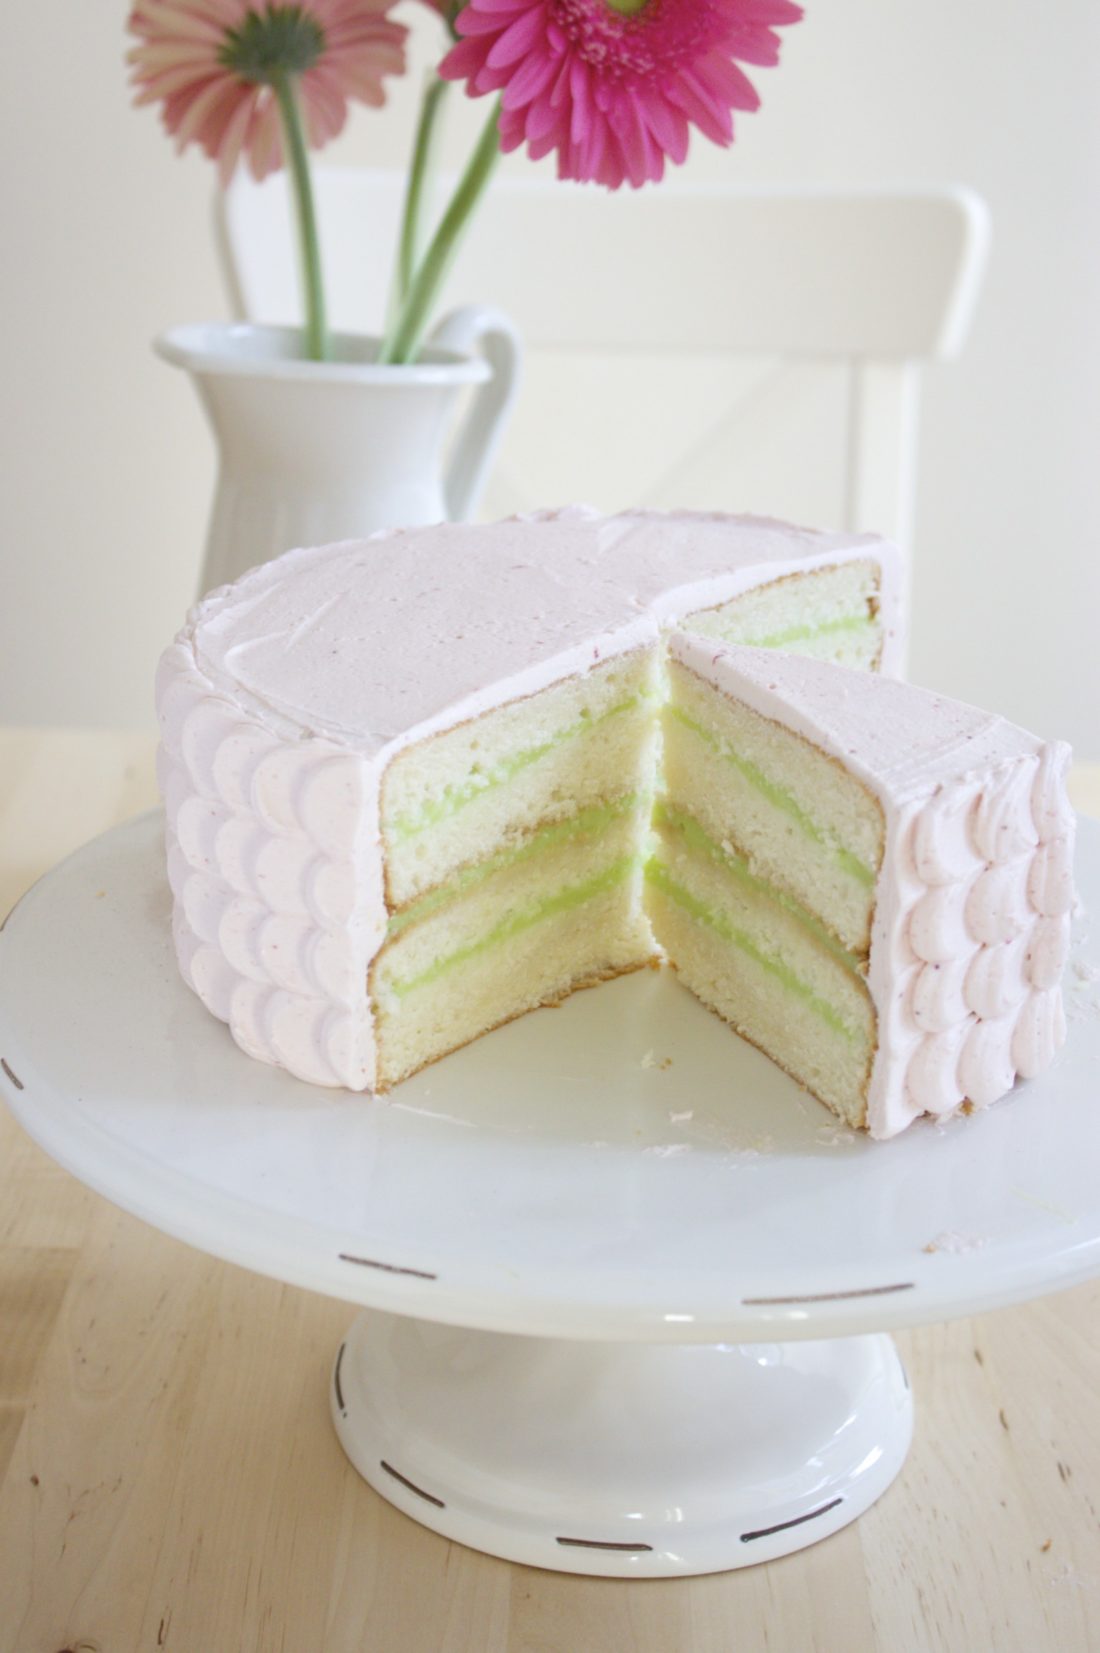 Strawberry & Lime Layer Cake